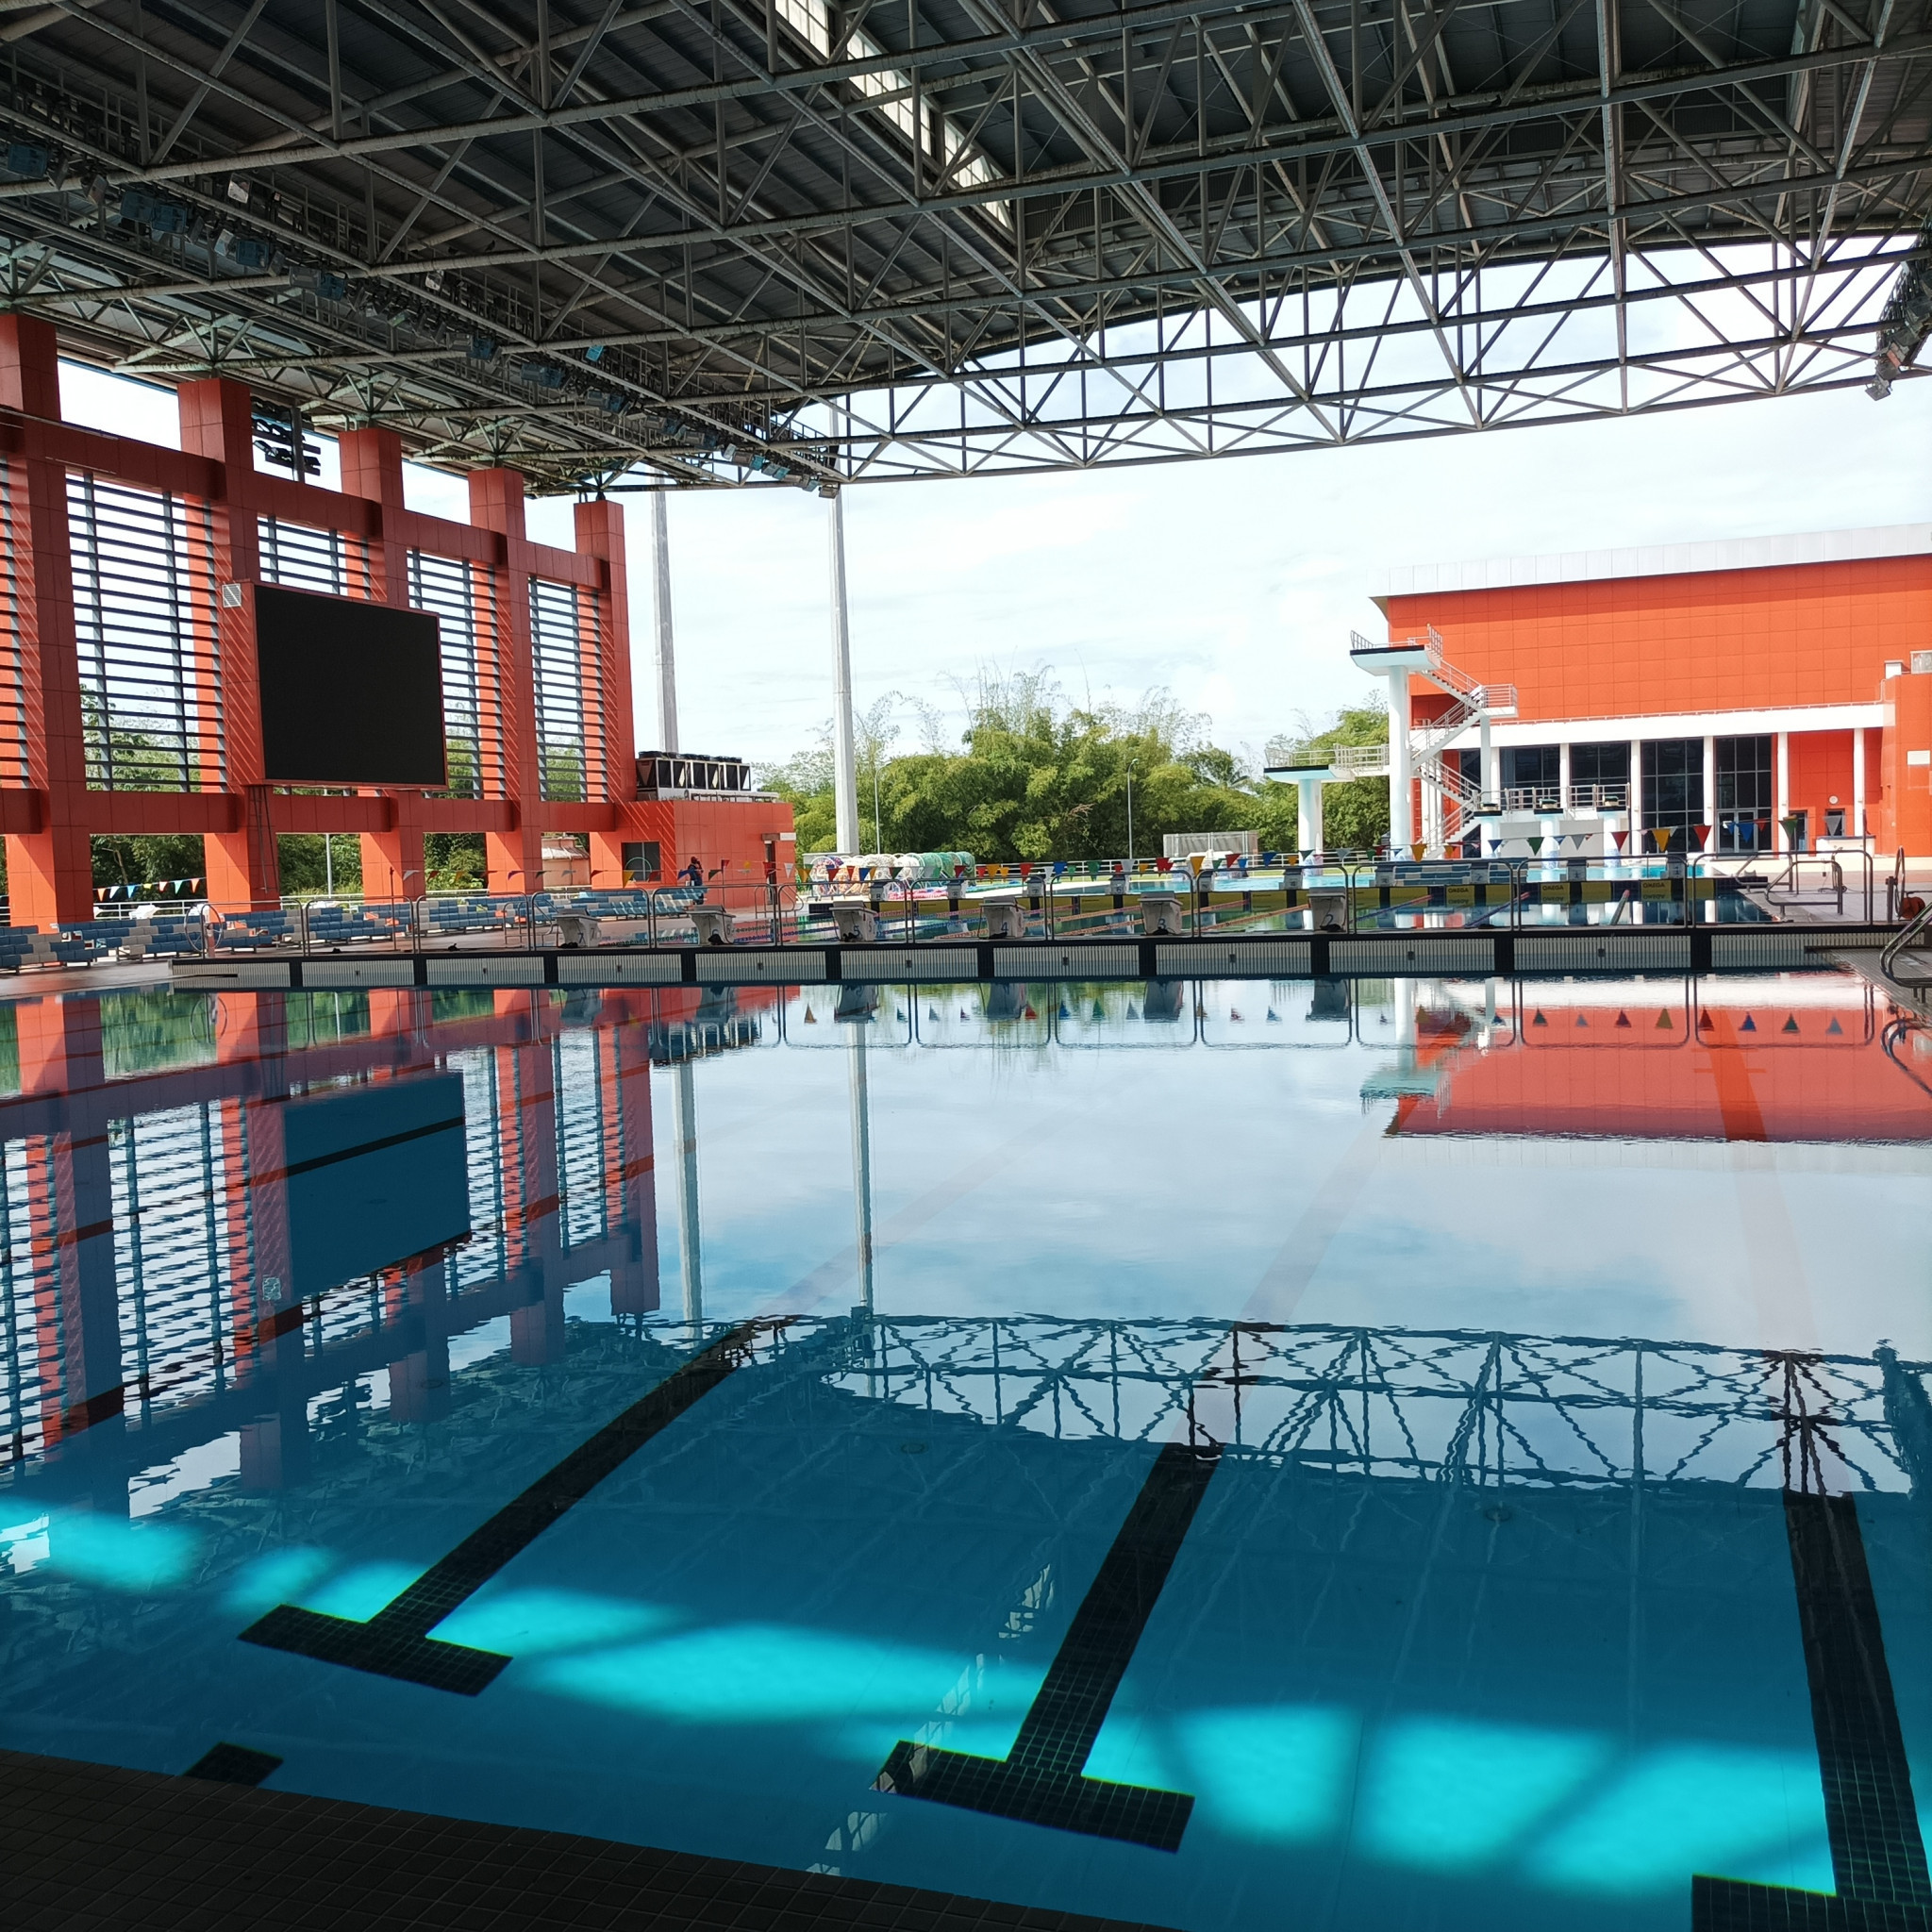 The swimming pool which is scheduled to stage swimming at the Commonwealth Youth Games next August ©ITG